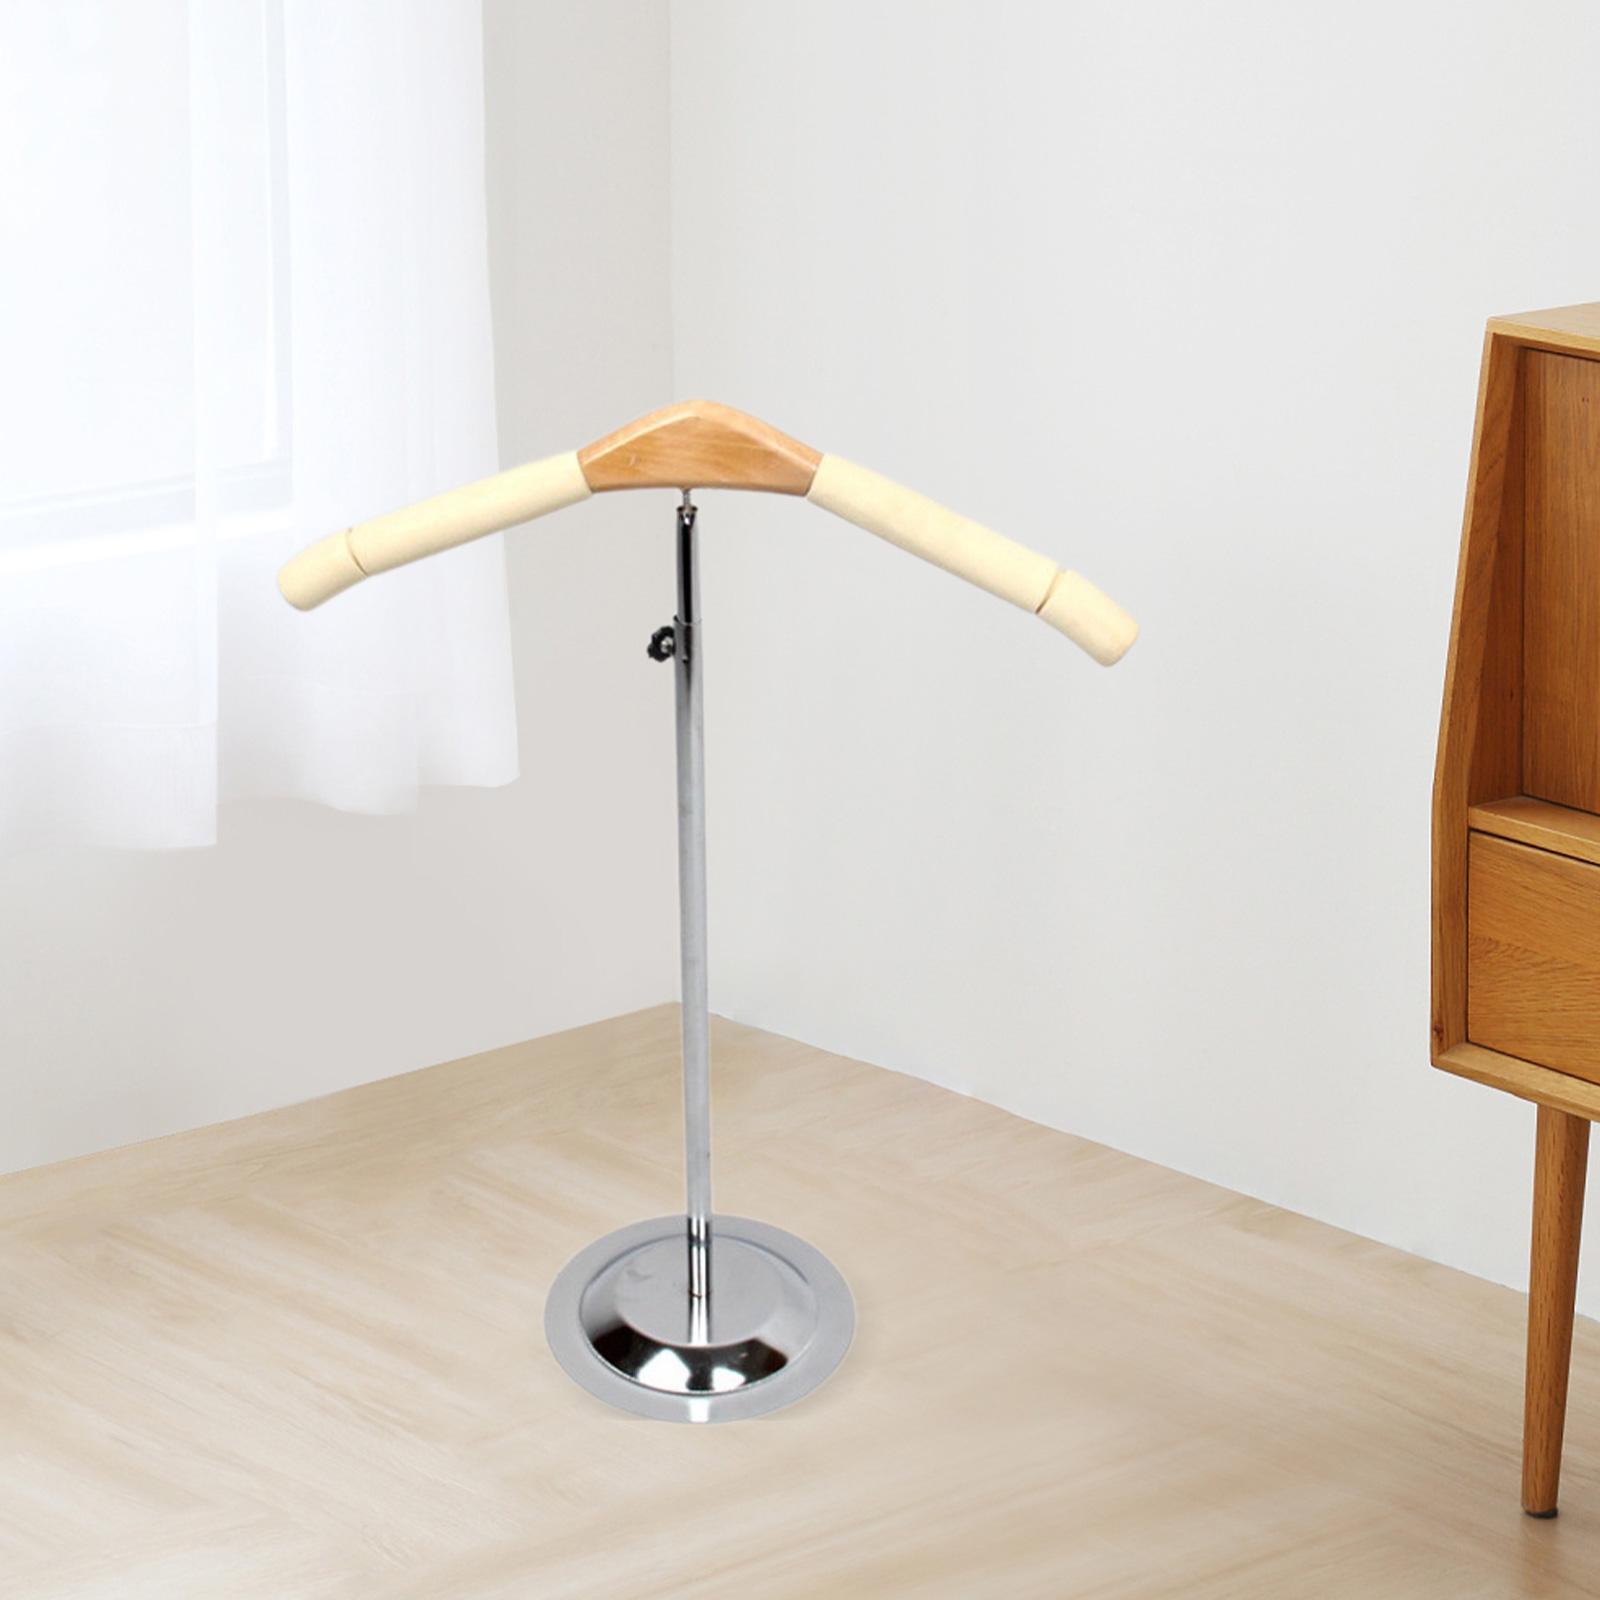 Clothing Display Stand T Shaped Sturdy Clothes Hanger for Garment Dress Coat Length 32cm Beige